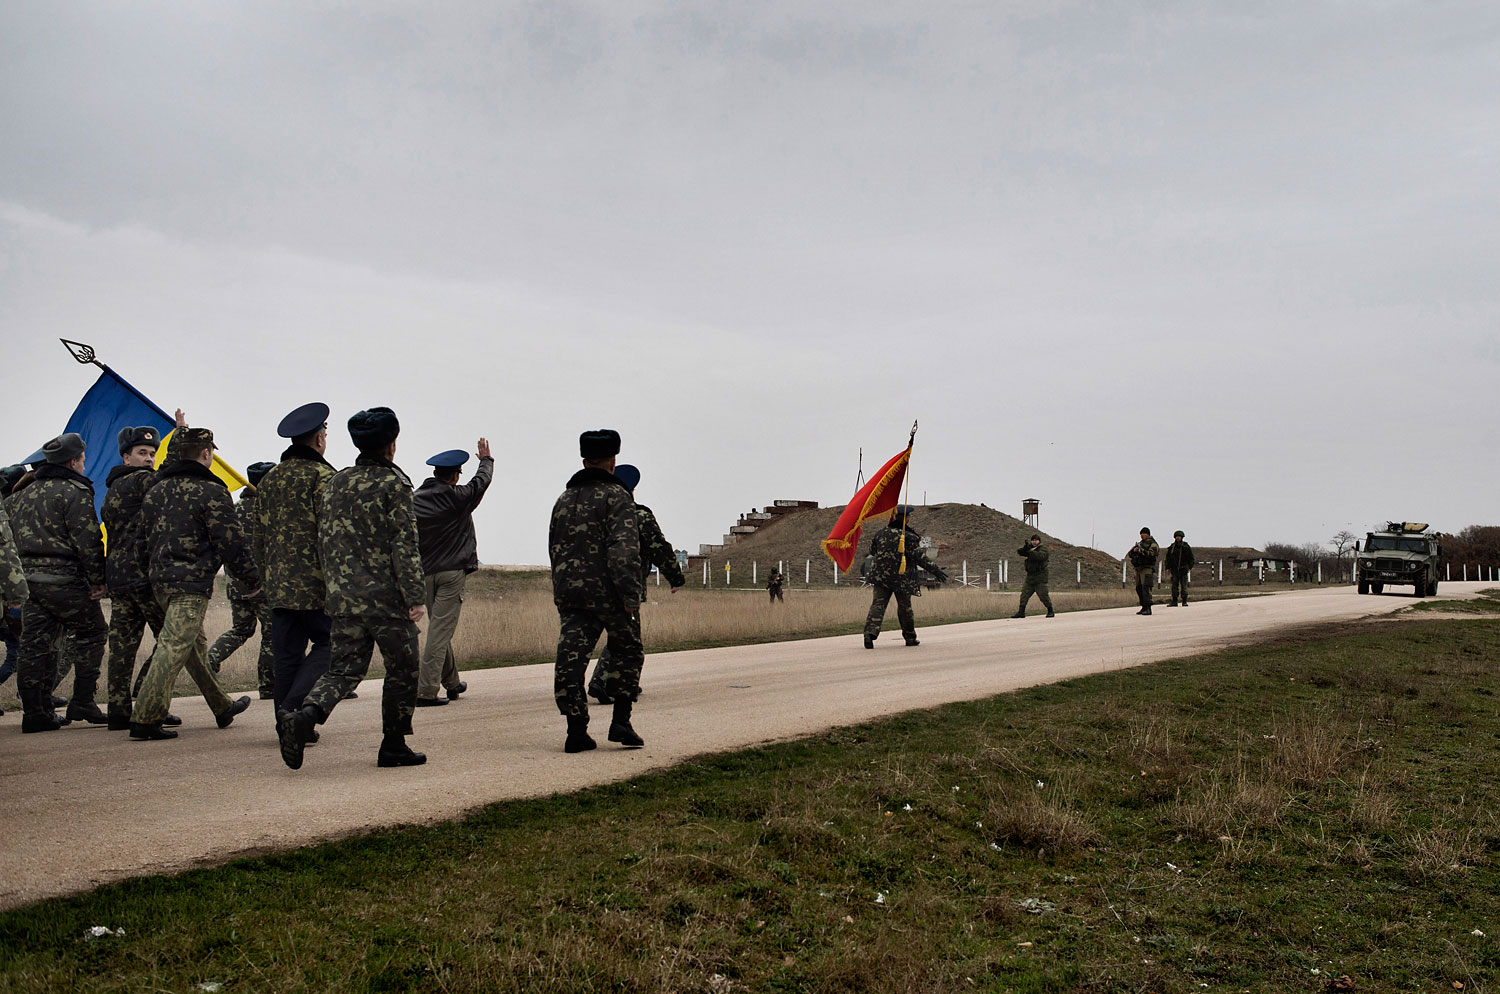 Unarmed Ukrainian soldiers approach Russian positions on the perimeter of the contested Belbek air force base in Crimea, March 4, 2014.